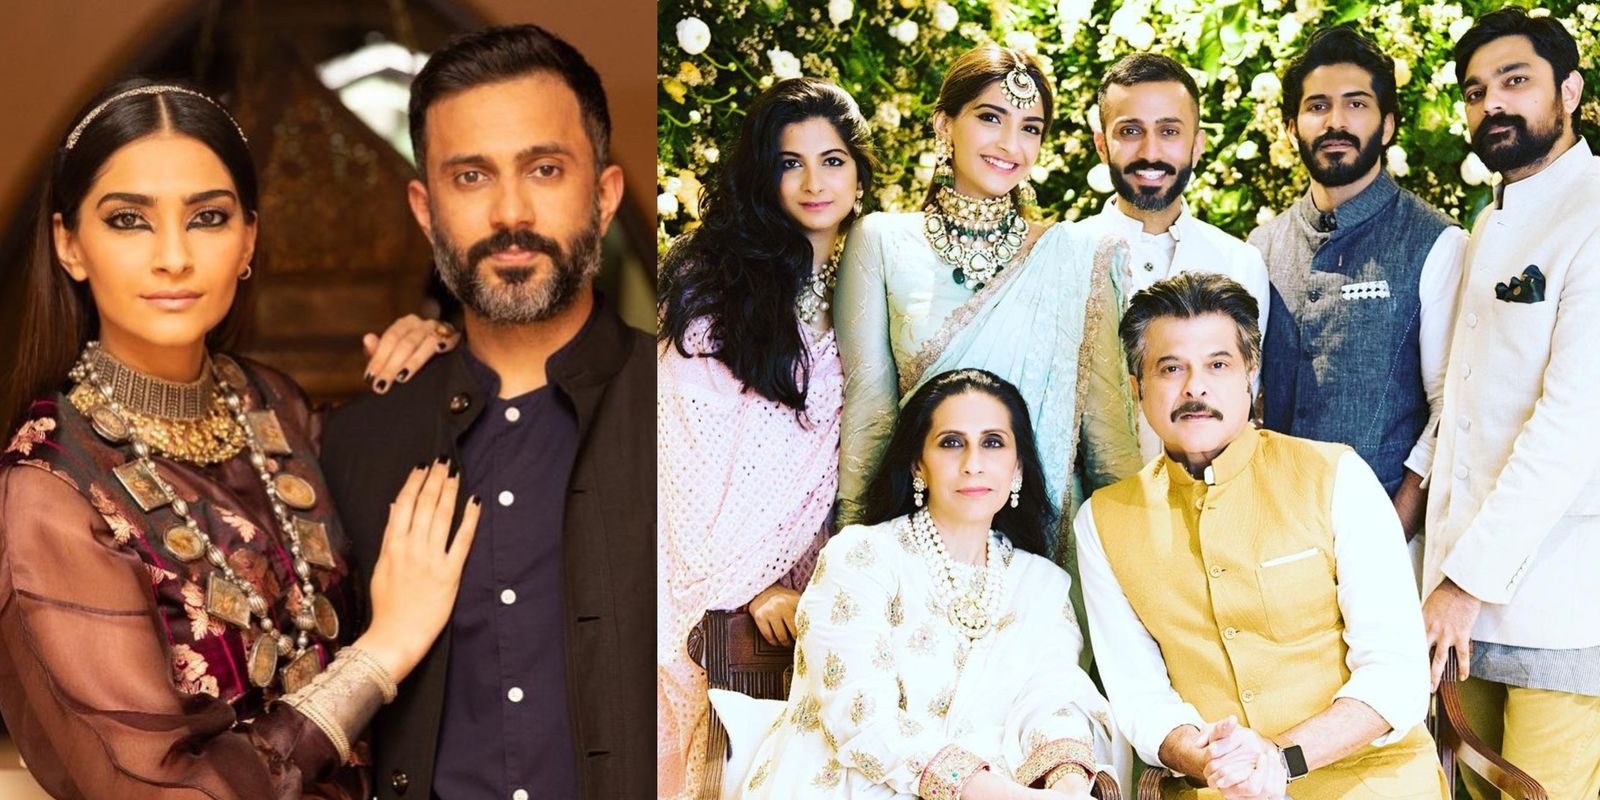 Sonam Kapoor Celebrates Diwali With Husband Anand Ahuja; Hopes To Spend The Festival With Entire Family Next Year